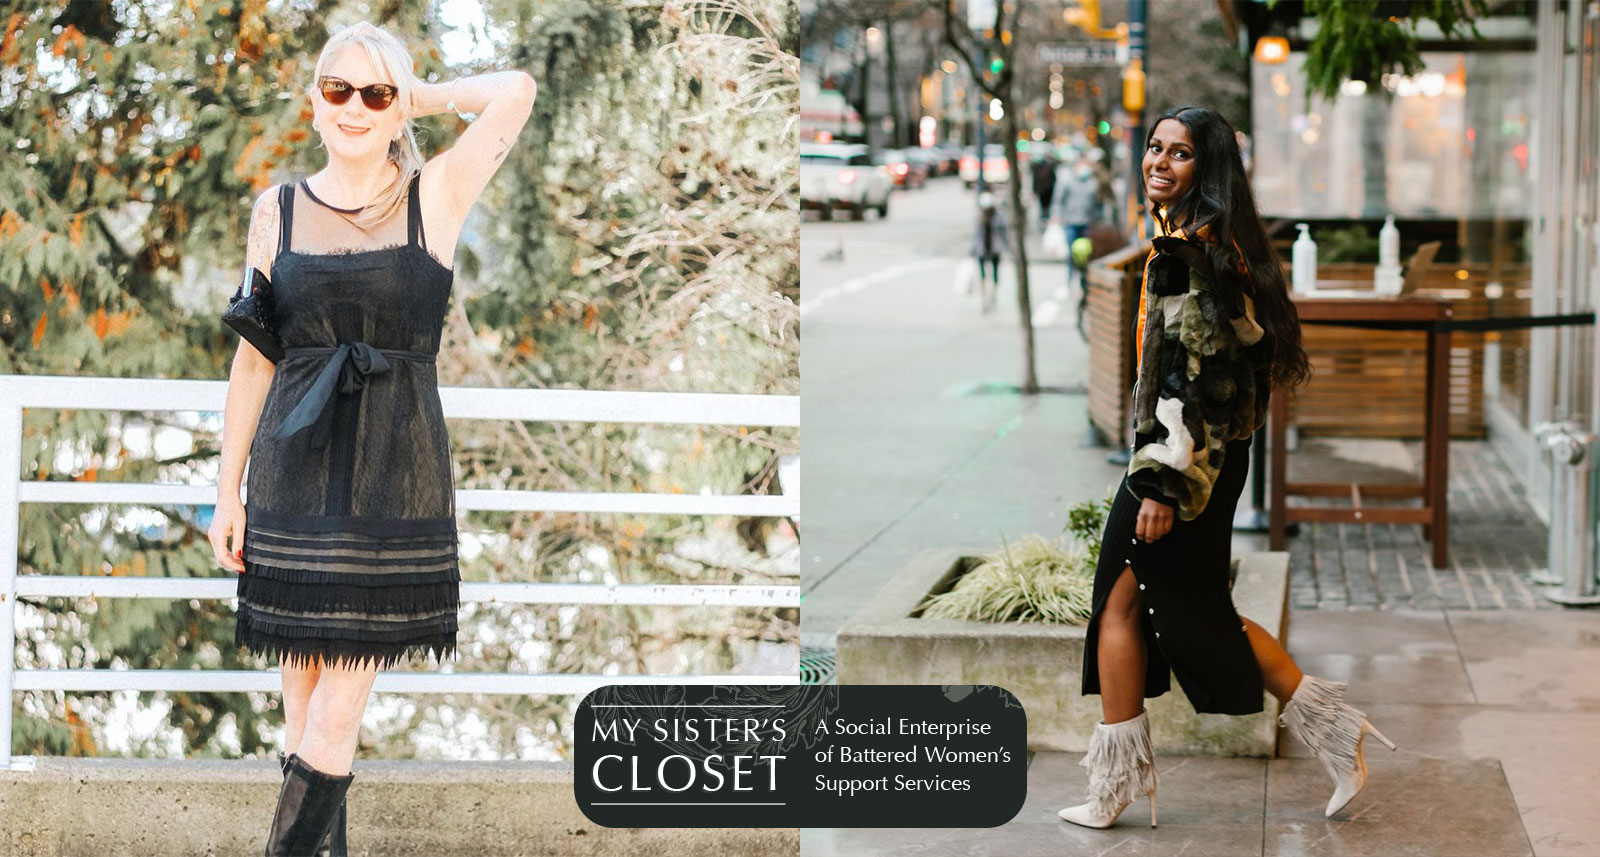 Take action to end gender based violence by shopping My Sister's Closet online